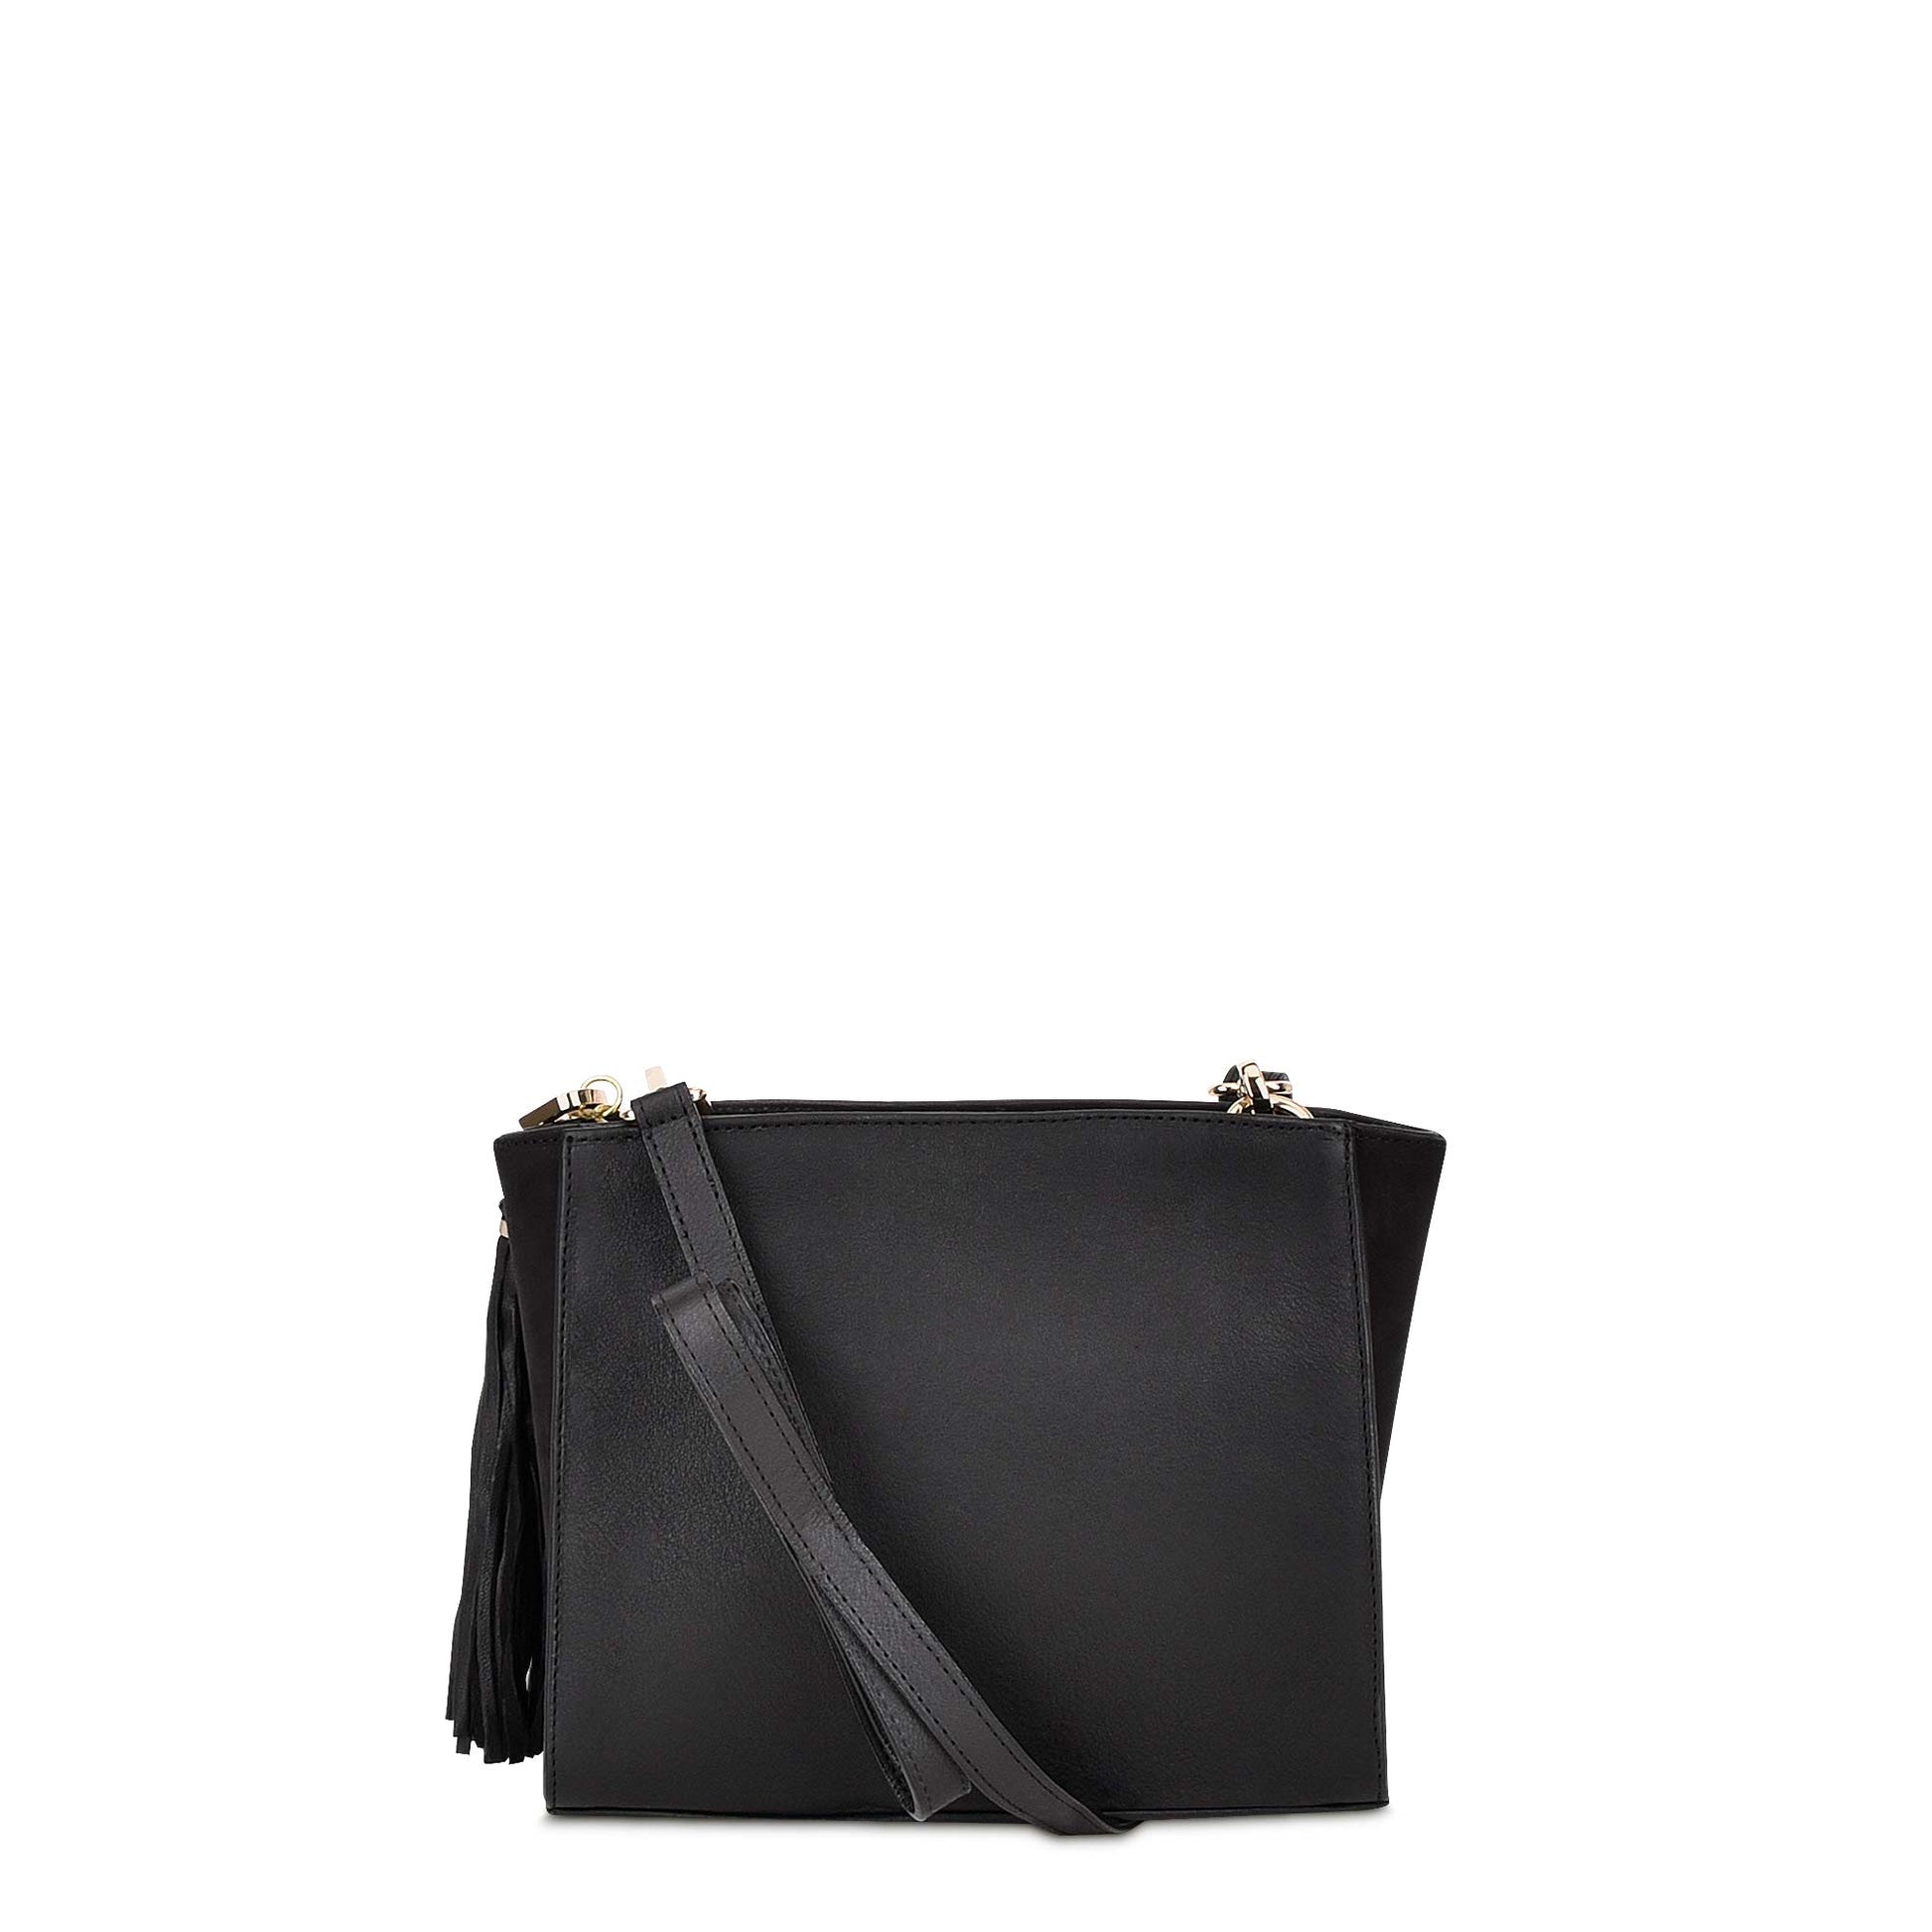 The back and removable strap, made from robust bovine leather, ensure the bag's longevity